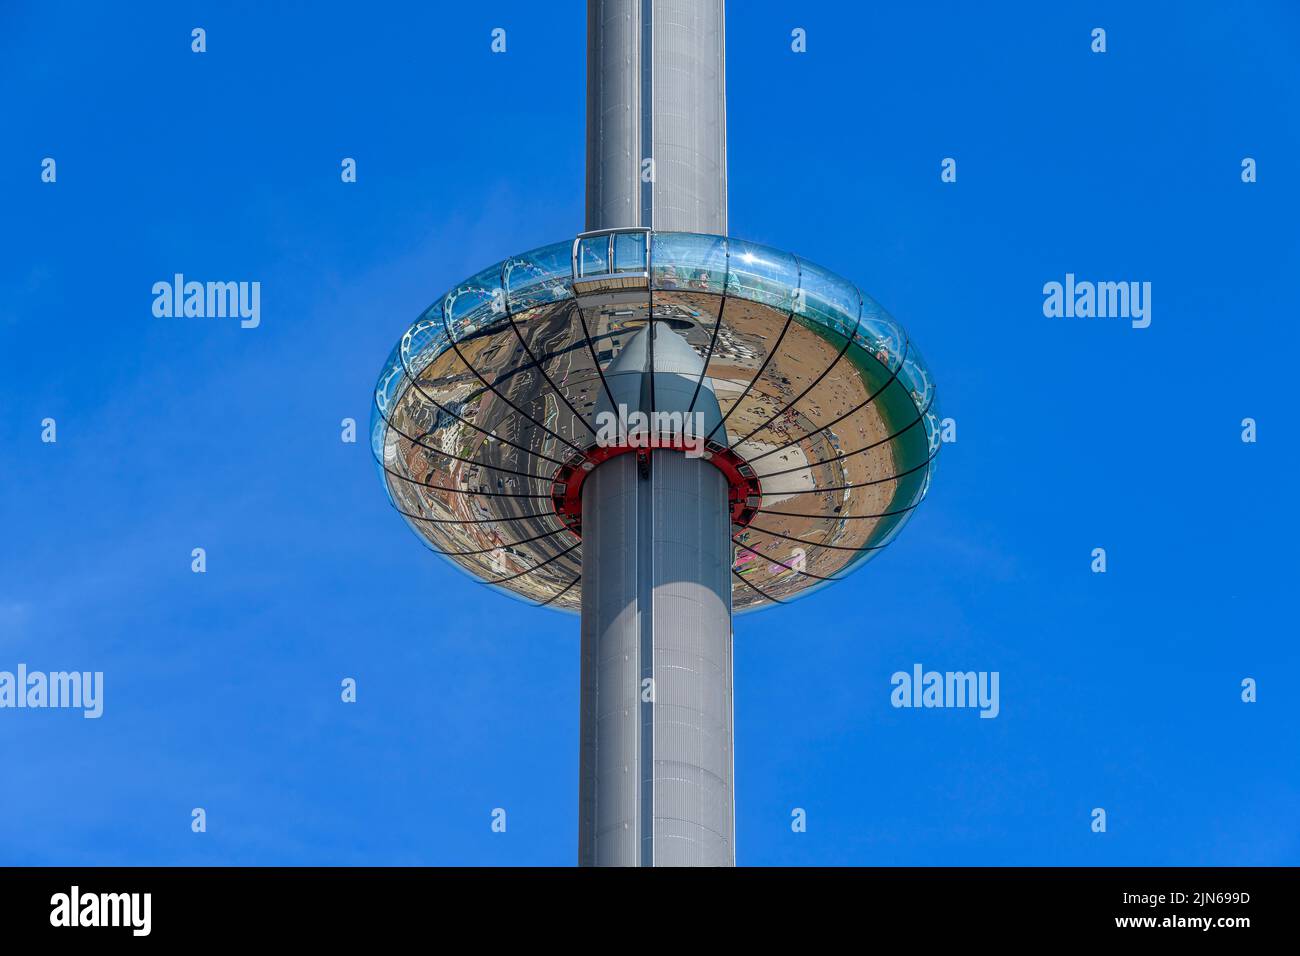 Closeups of Brighton's iconic British Airways i360 Viewing Tower. The curvaceous glass pod takes 10 minutes to gently rise the top of the 162m tower. Stock Photo